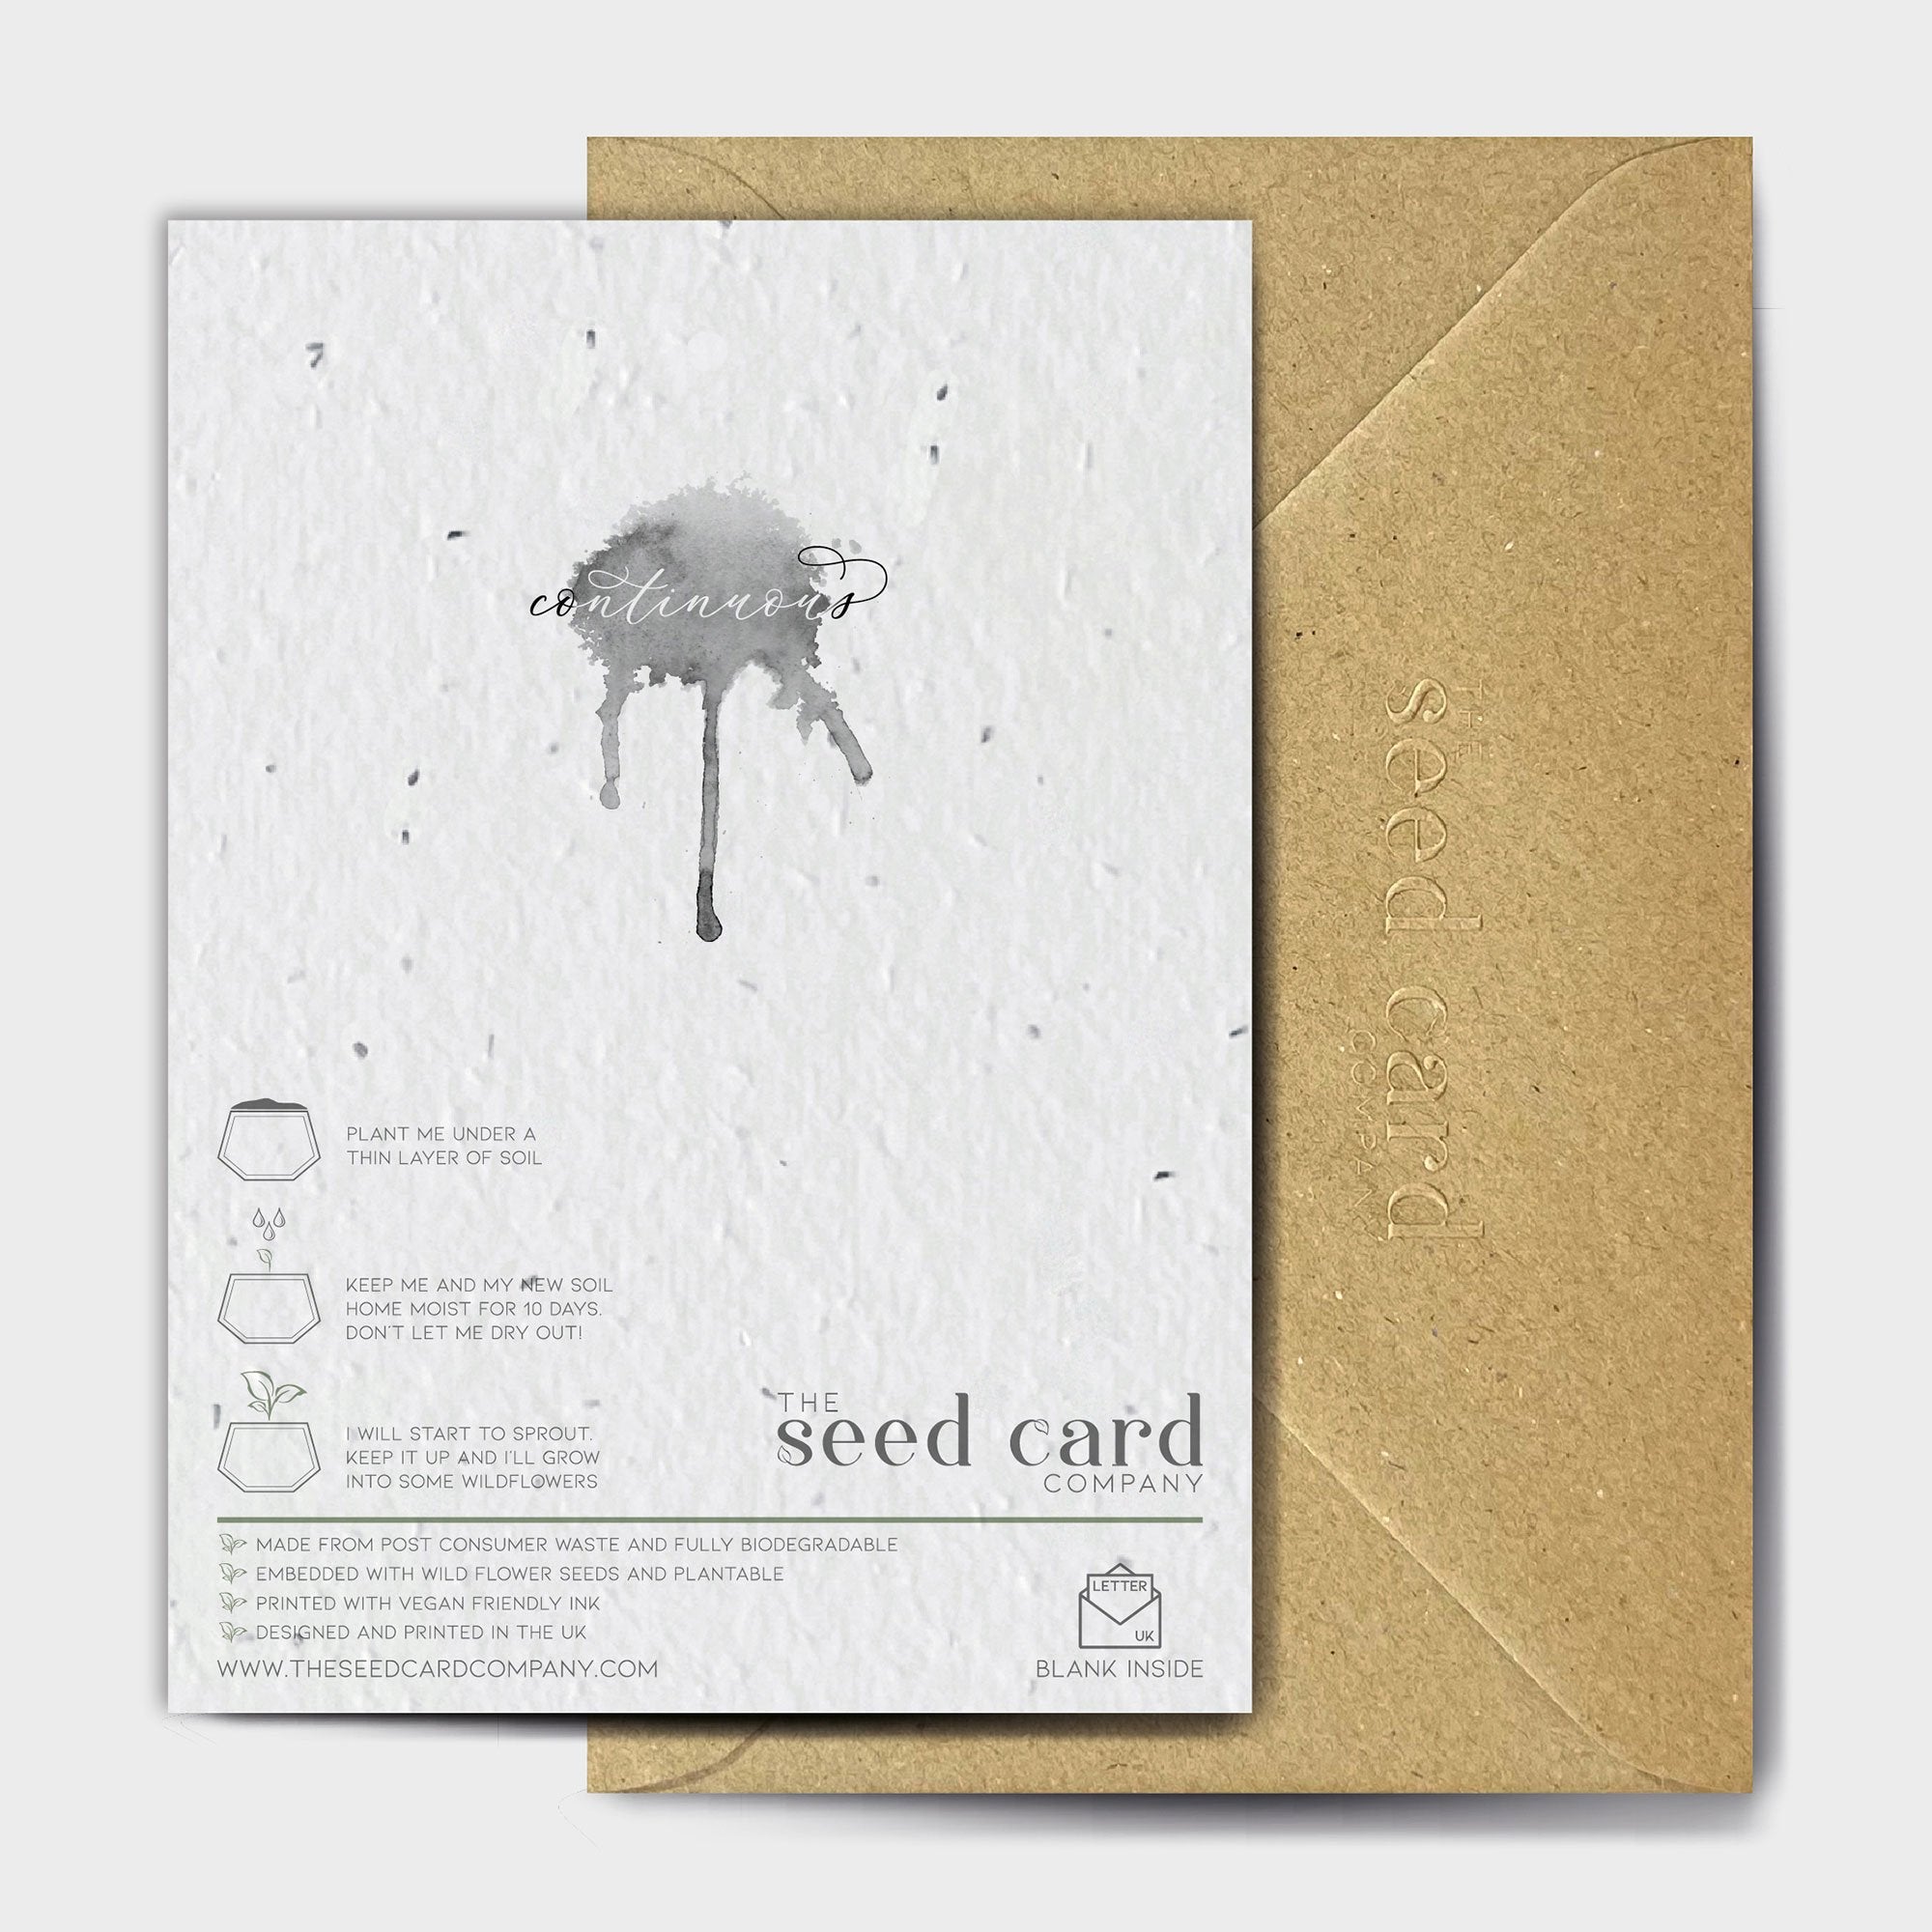 Shop online Loud & Proud - 100% biodegradable seed-embedded cards Shop -The Seed Card Company